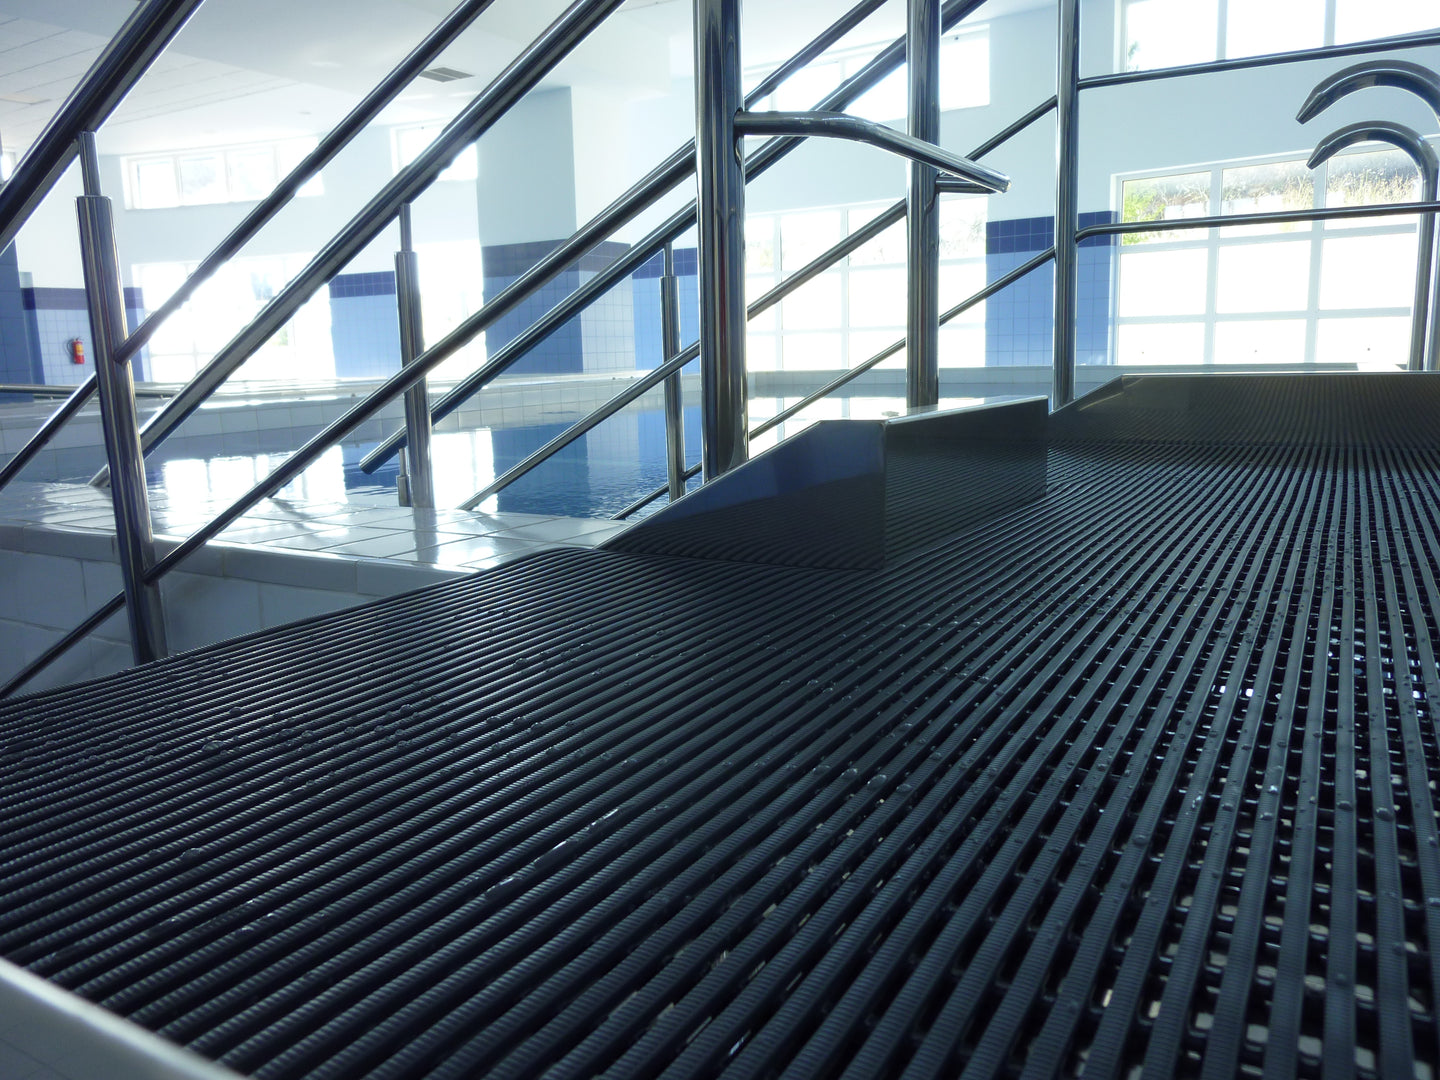 Our pool matting is safe, comfortable and hygienic